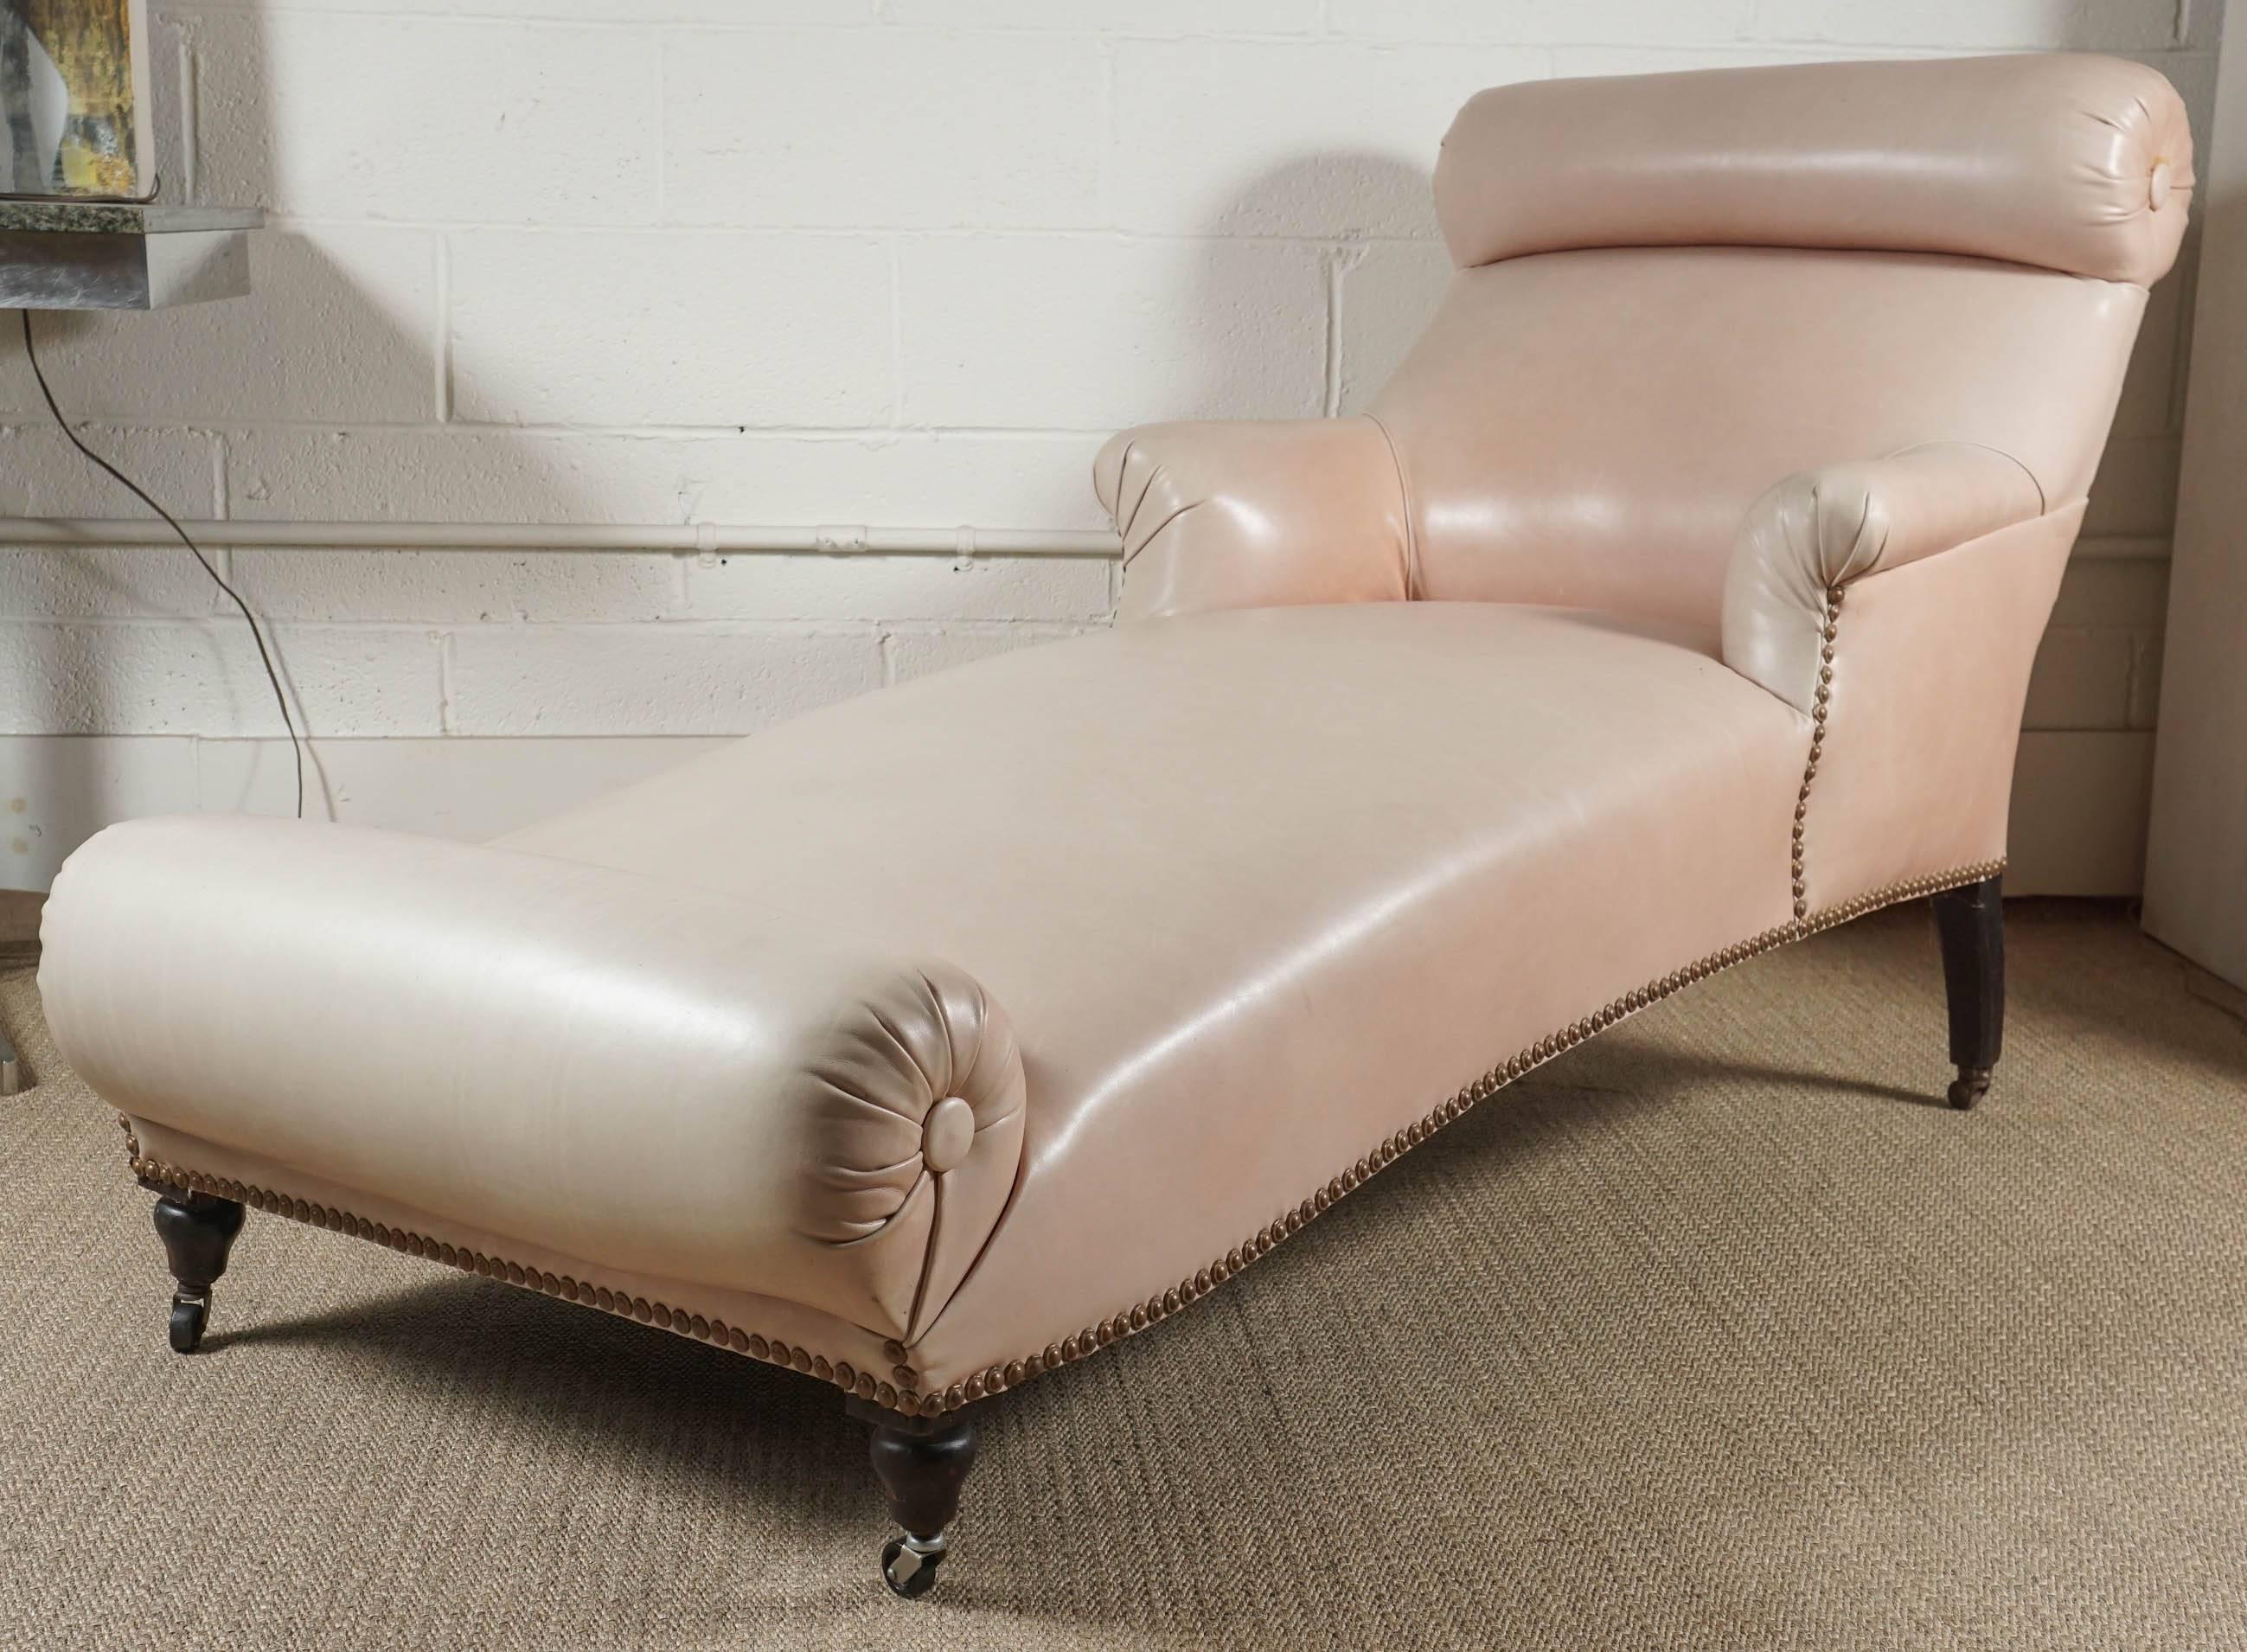 Here is an elegant Napoleon III double bolster chaise that has been upholstered in a salmon colored Edelman leather. Stylish and chic, this antique chaise has a modern look. 